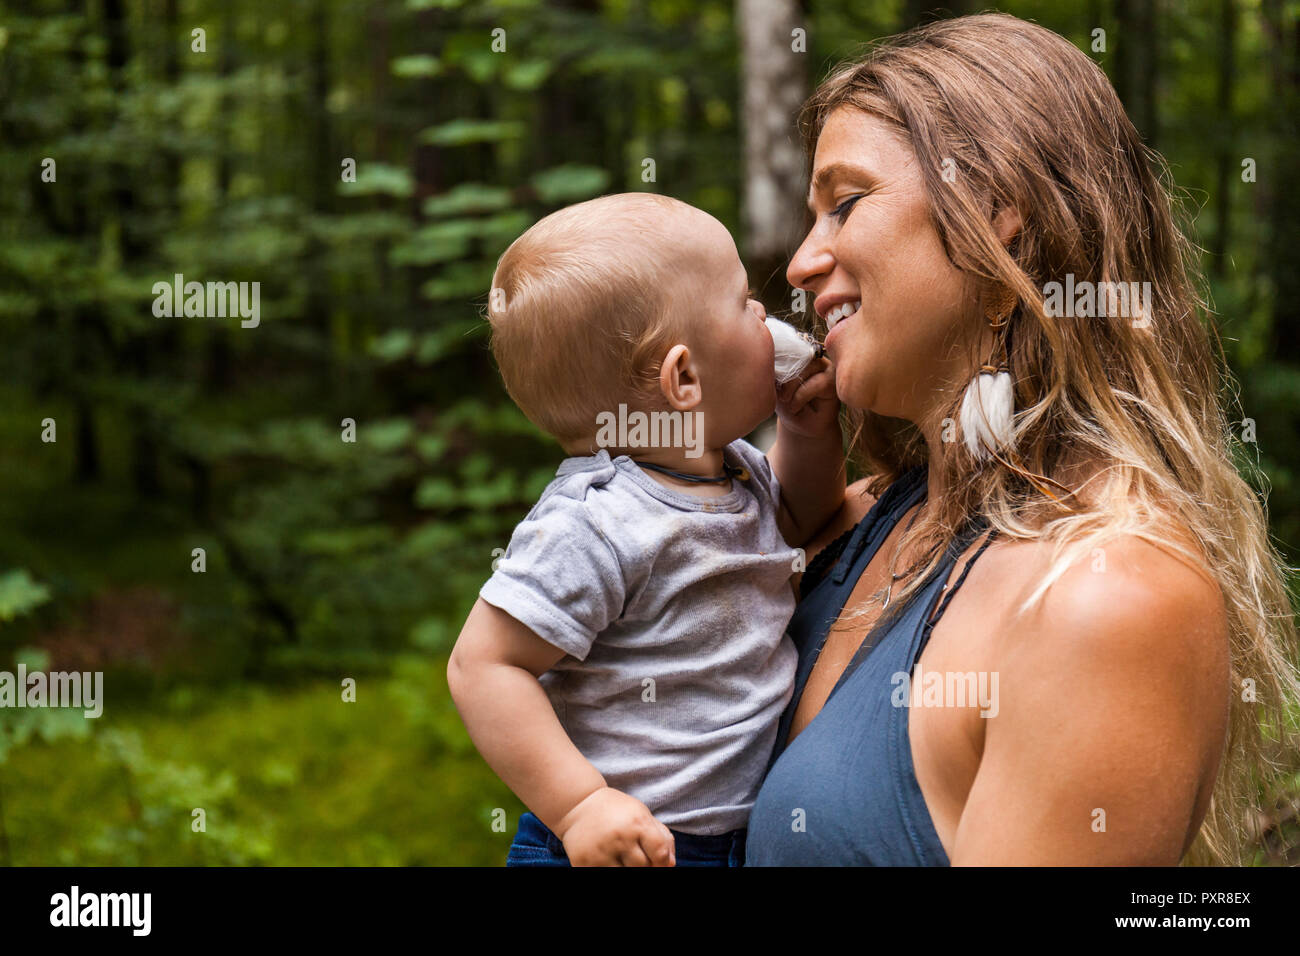 Smiling mother holding baby boy in forest Stock Photo